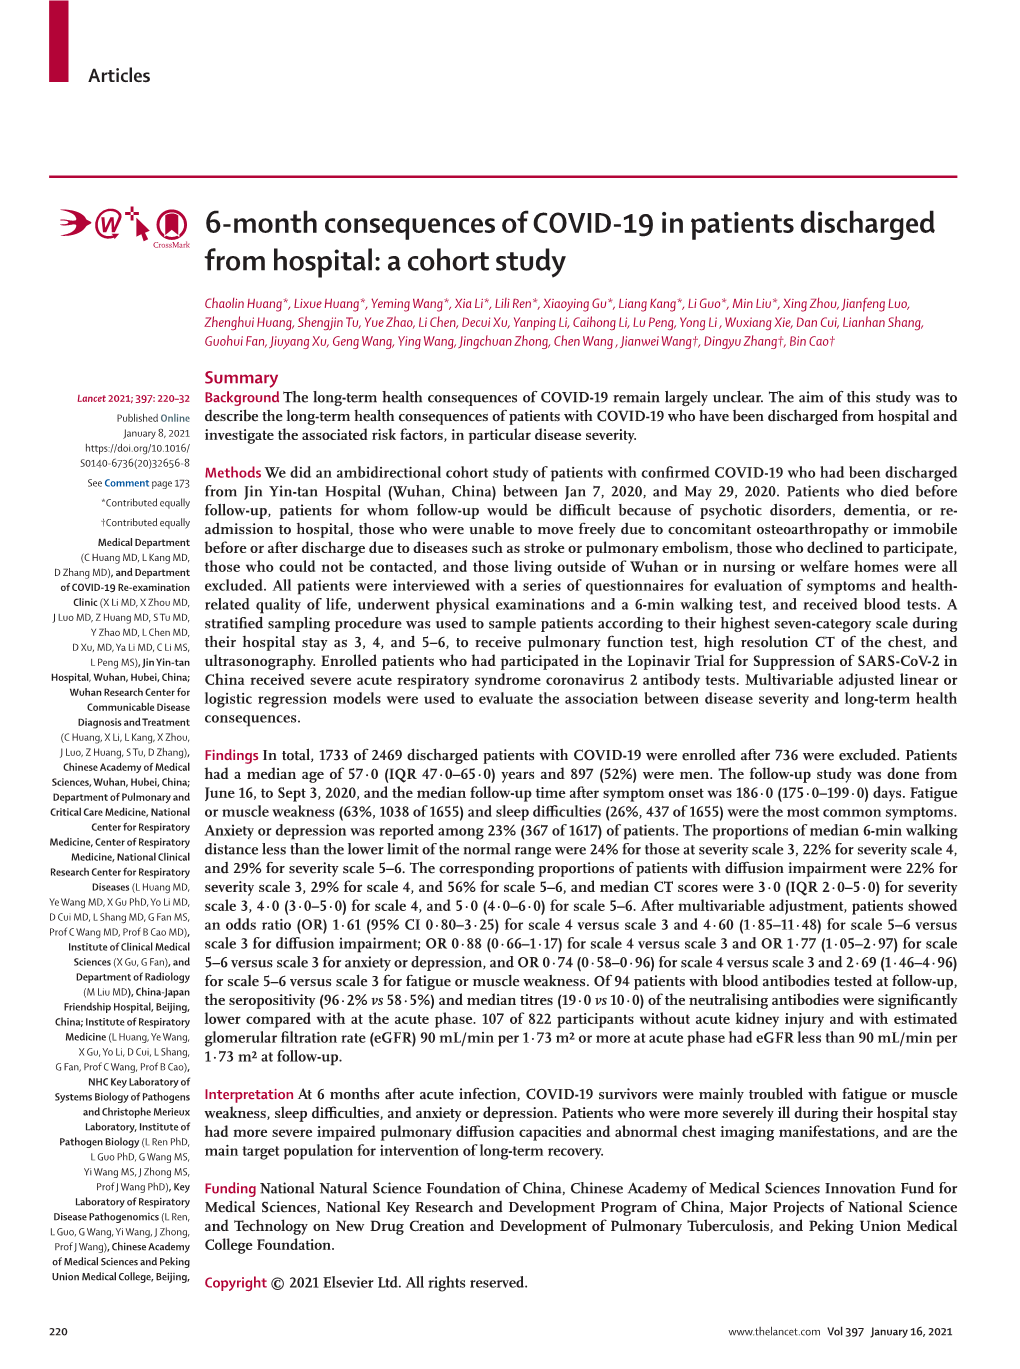 6-Month Consequences of COVID-19 in Patients Discharged from Hospital: a Cohort Study